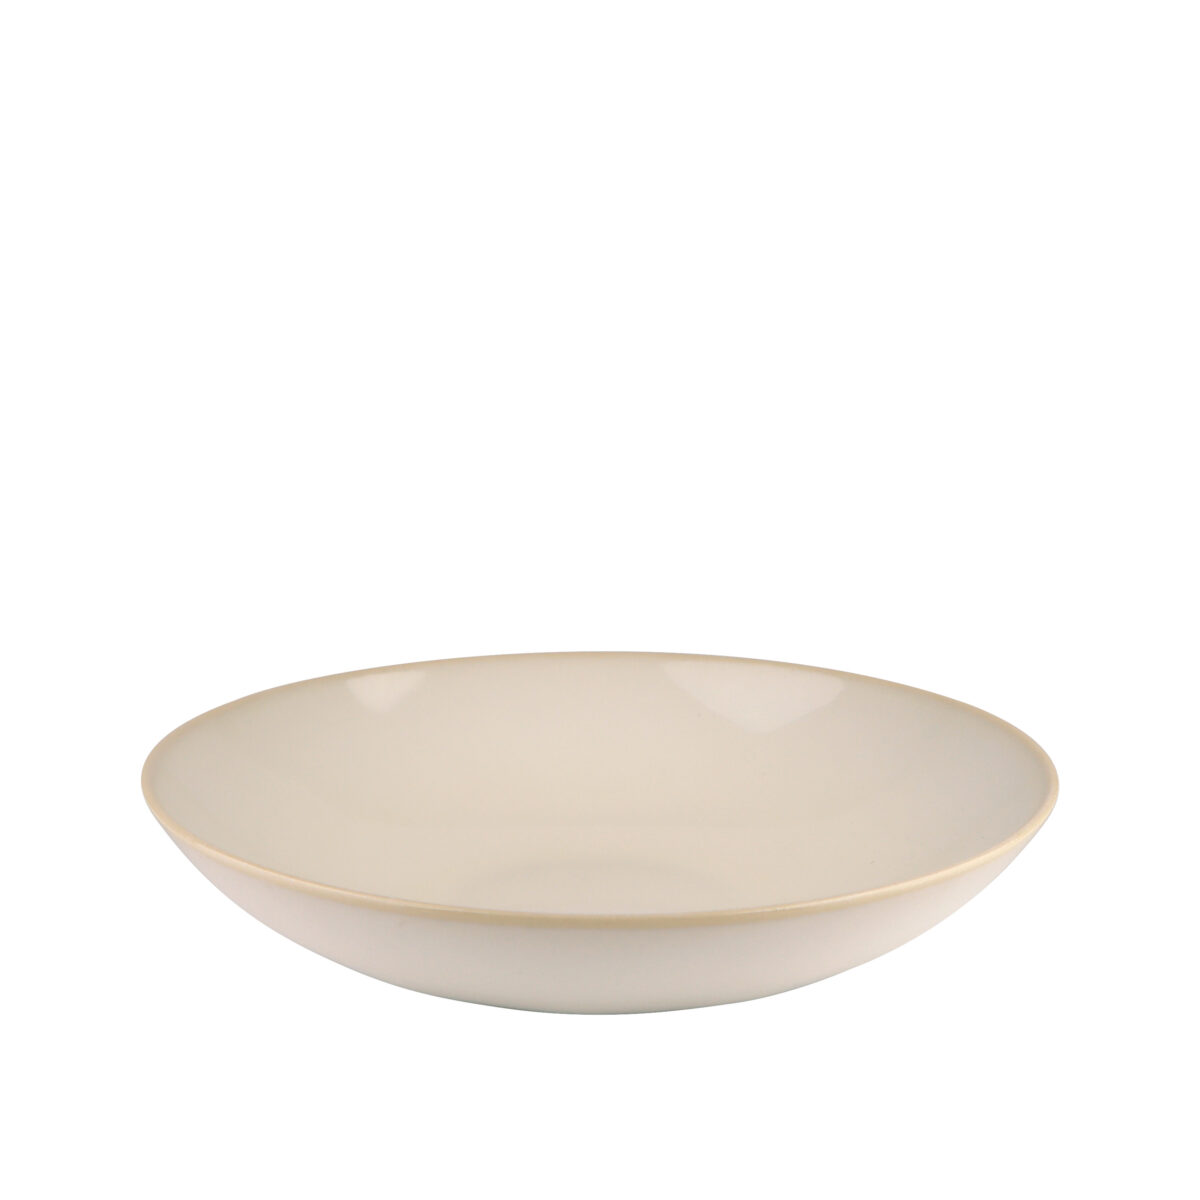 Clássico collection - vitreous stoneware - ID7. A new technology and development developed for the hospitality market and demands. Clássico bowl 22